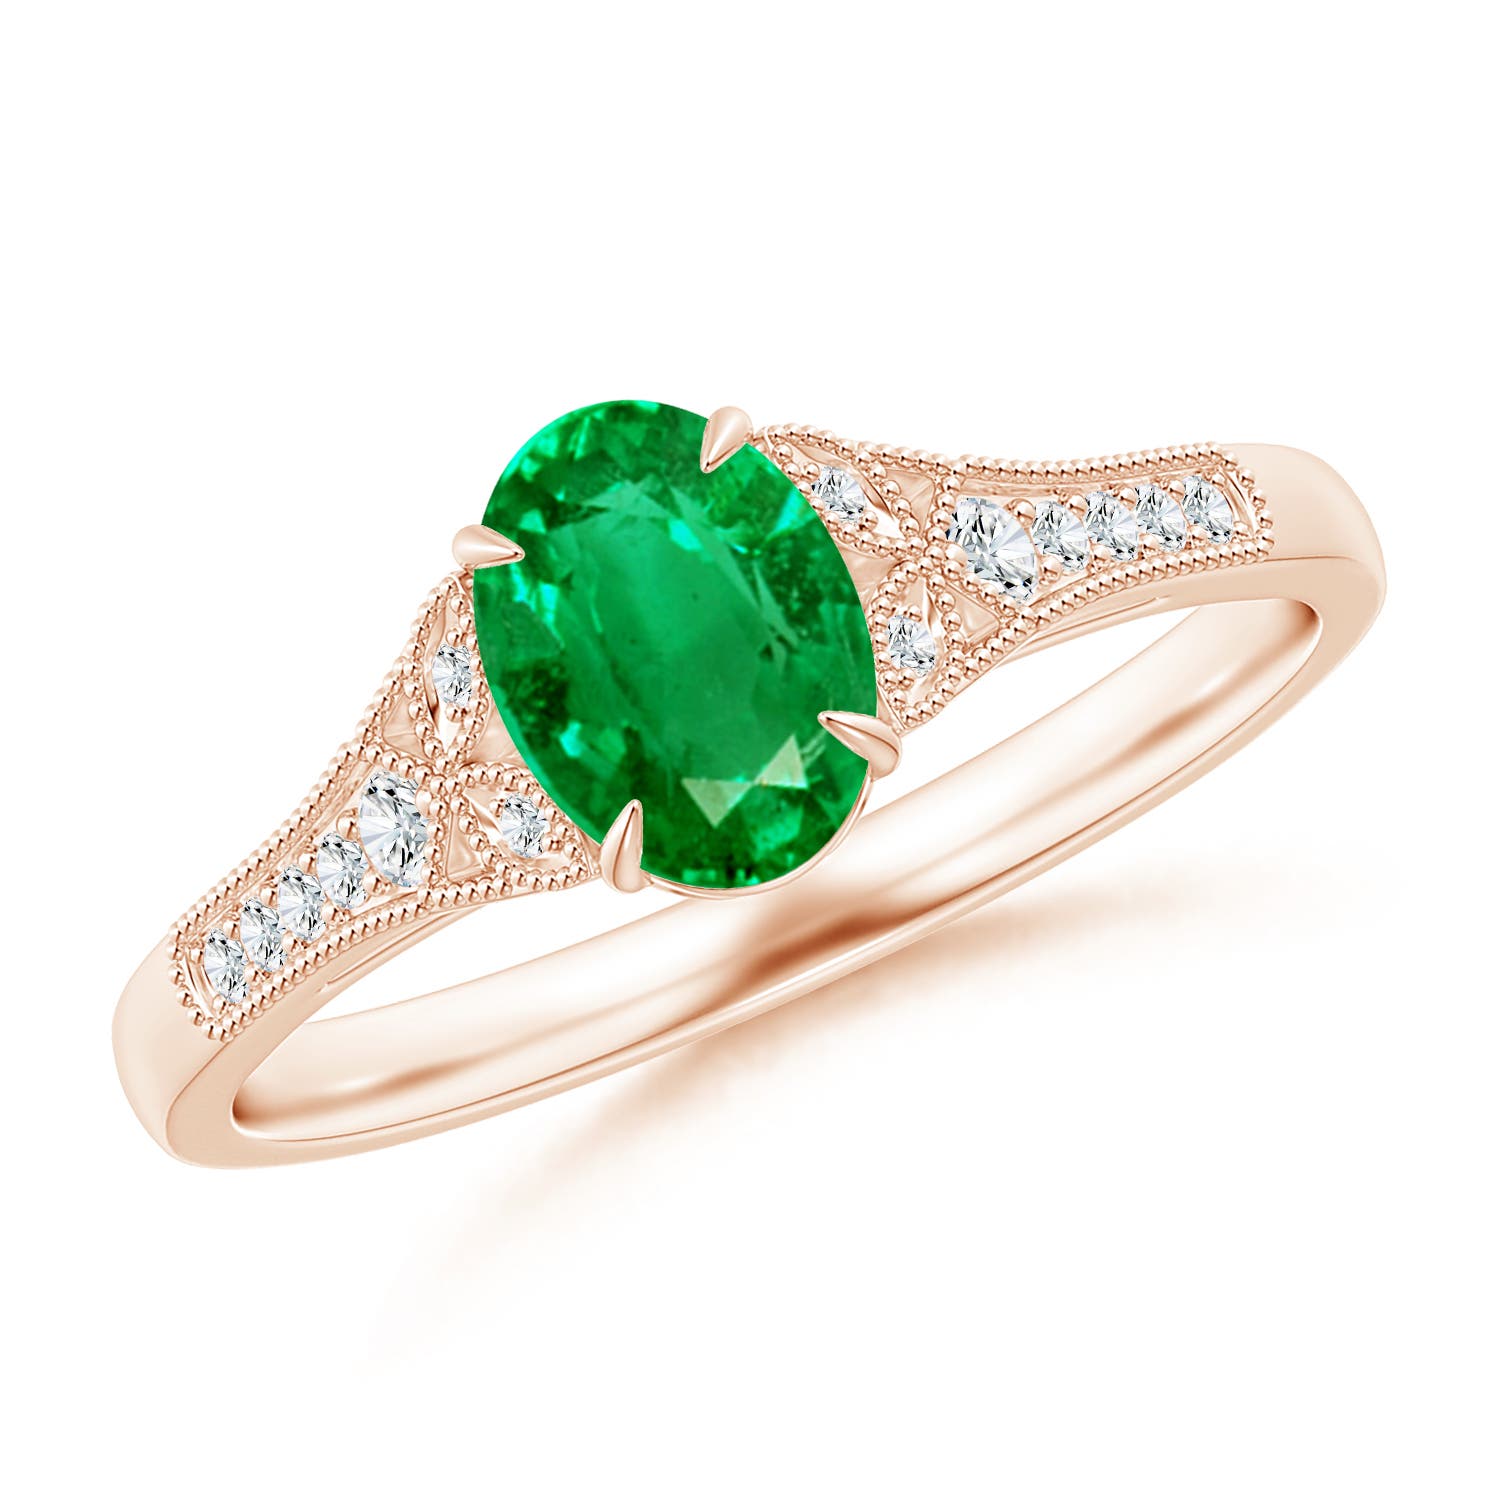 AAA - Emerald / 0.77 CT / 14 KT Rose Gold